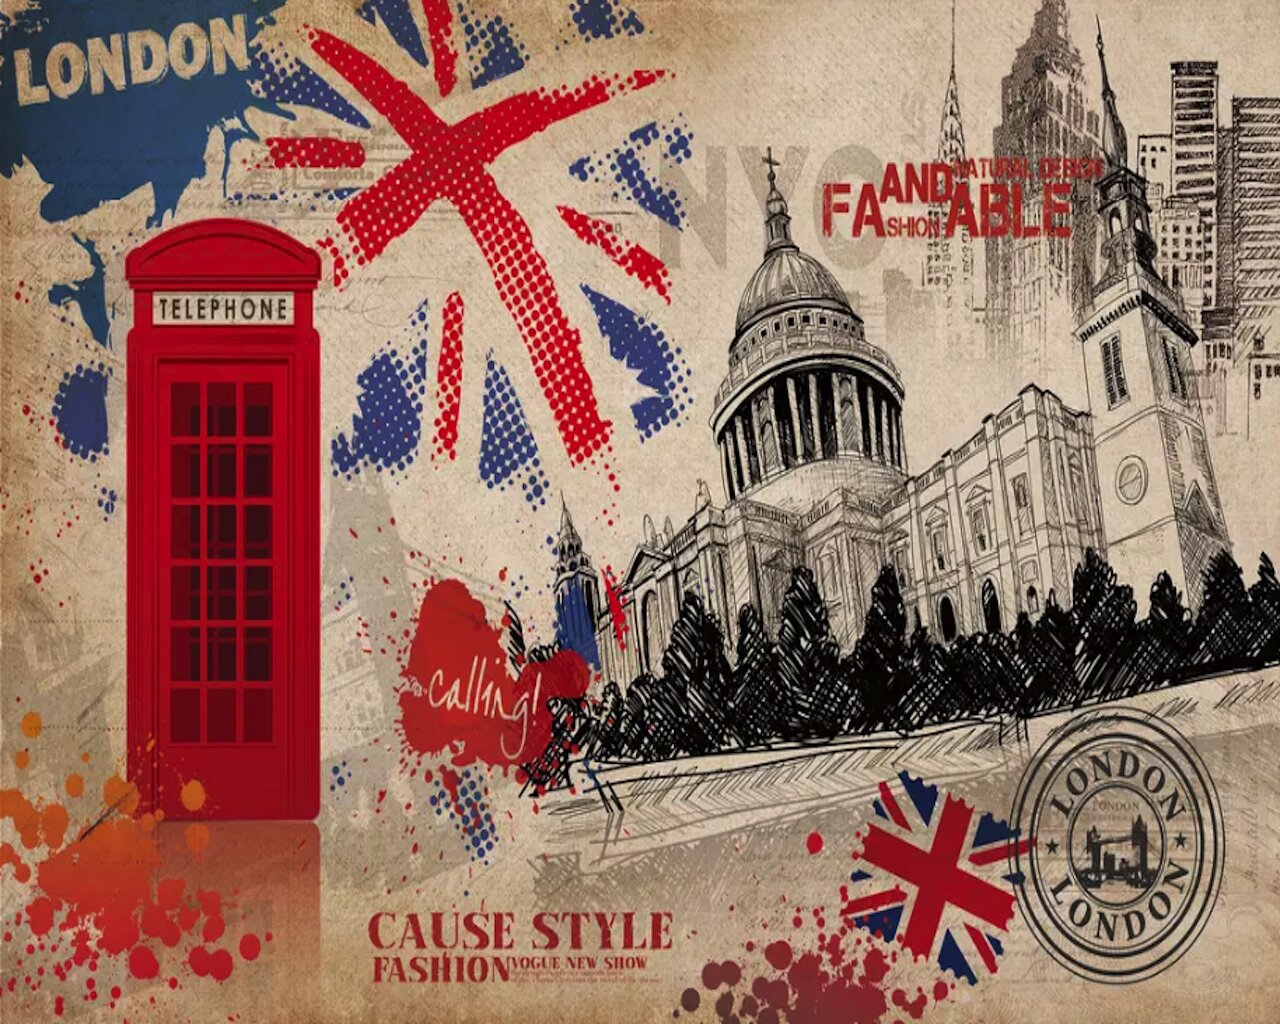 GK Wall Design London Landscape, English Flag And Phone Booth Textile Wallpaper